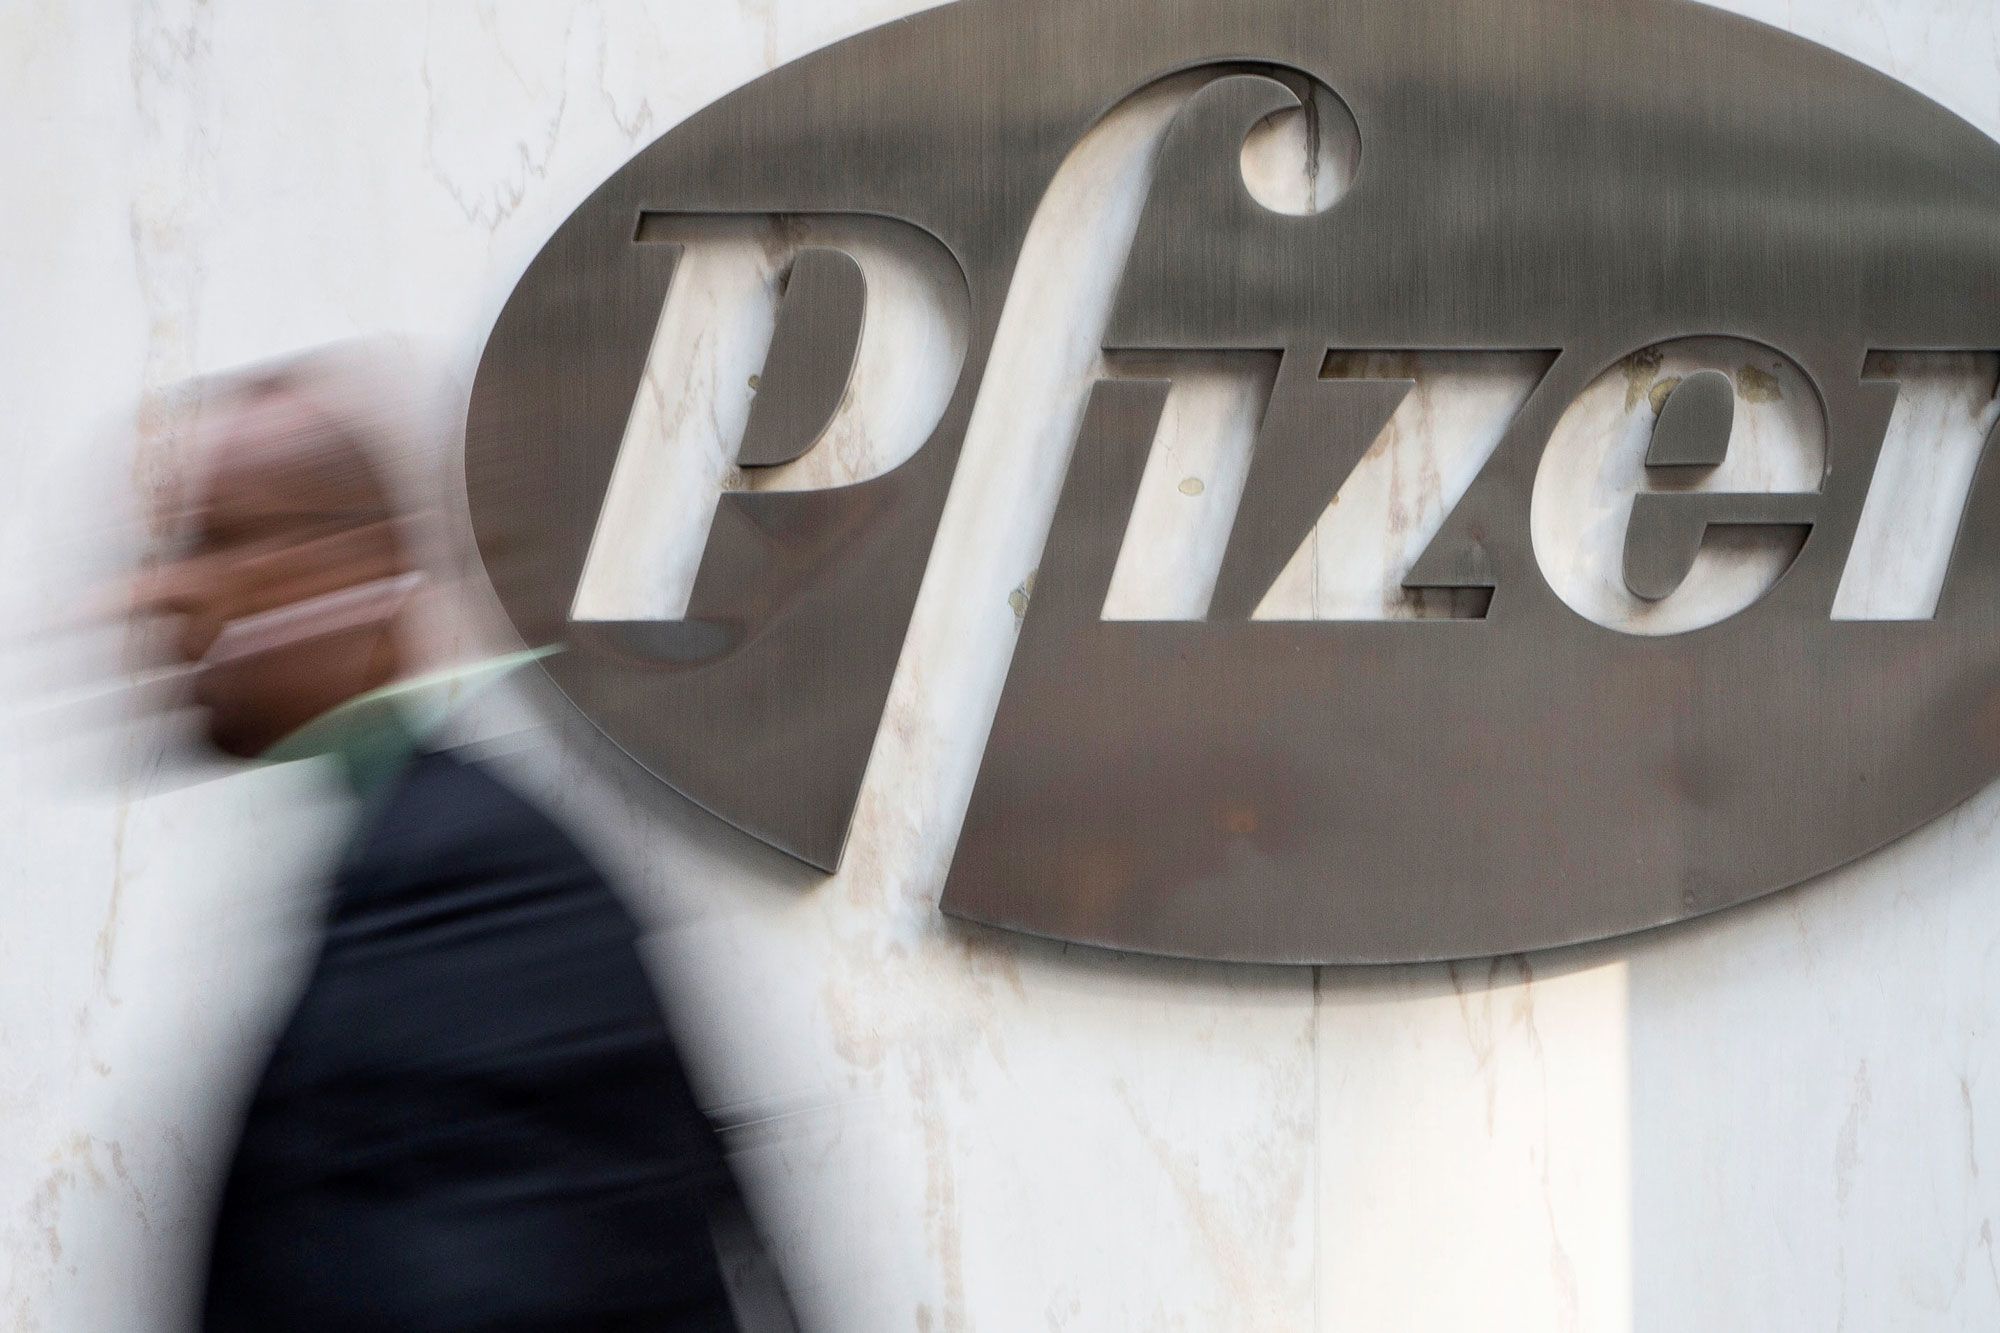 Pfizer plans combination of off-patent drug business with Mylan